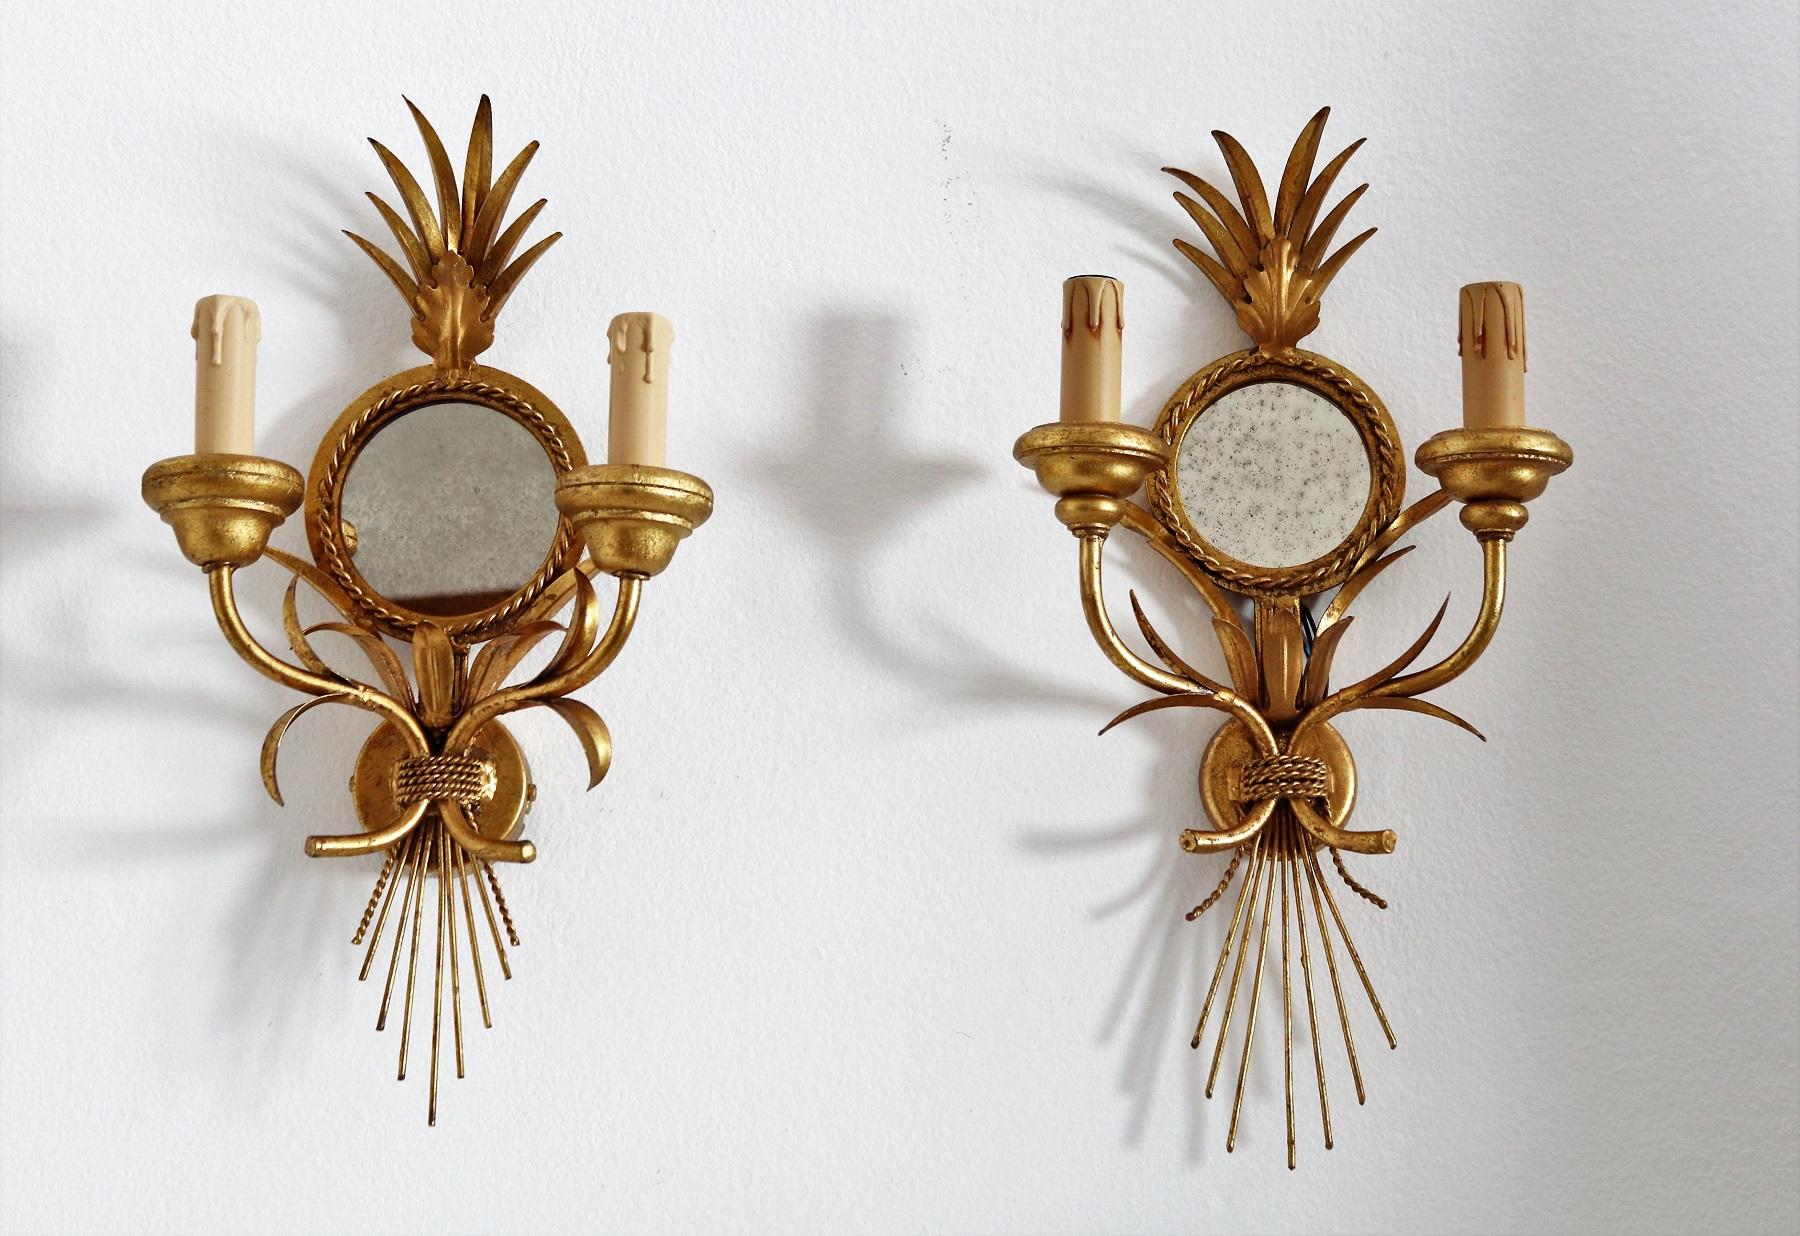 Gorgeous set of three wall sconces made of gilt metal leaves and a round antique style mirror.
Made by Hans Kögl in the 1970s.
The mirror diameter of two of the wall sconces are a little smaller than the third one; and the third sconce is a little